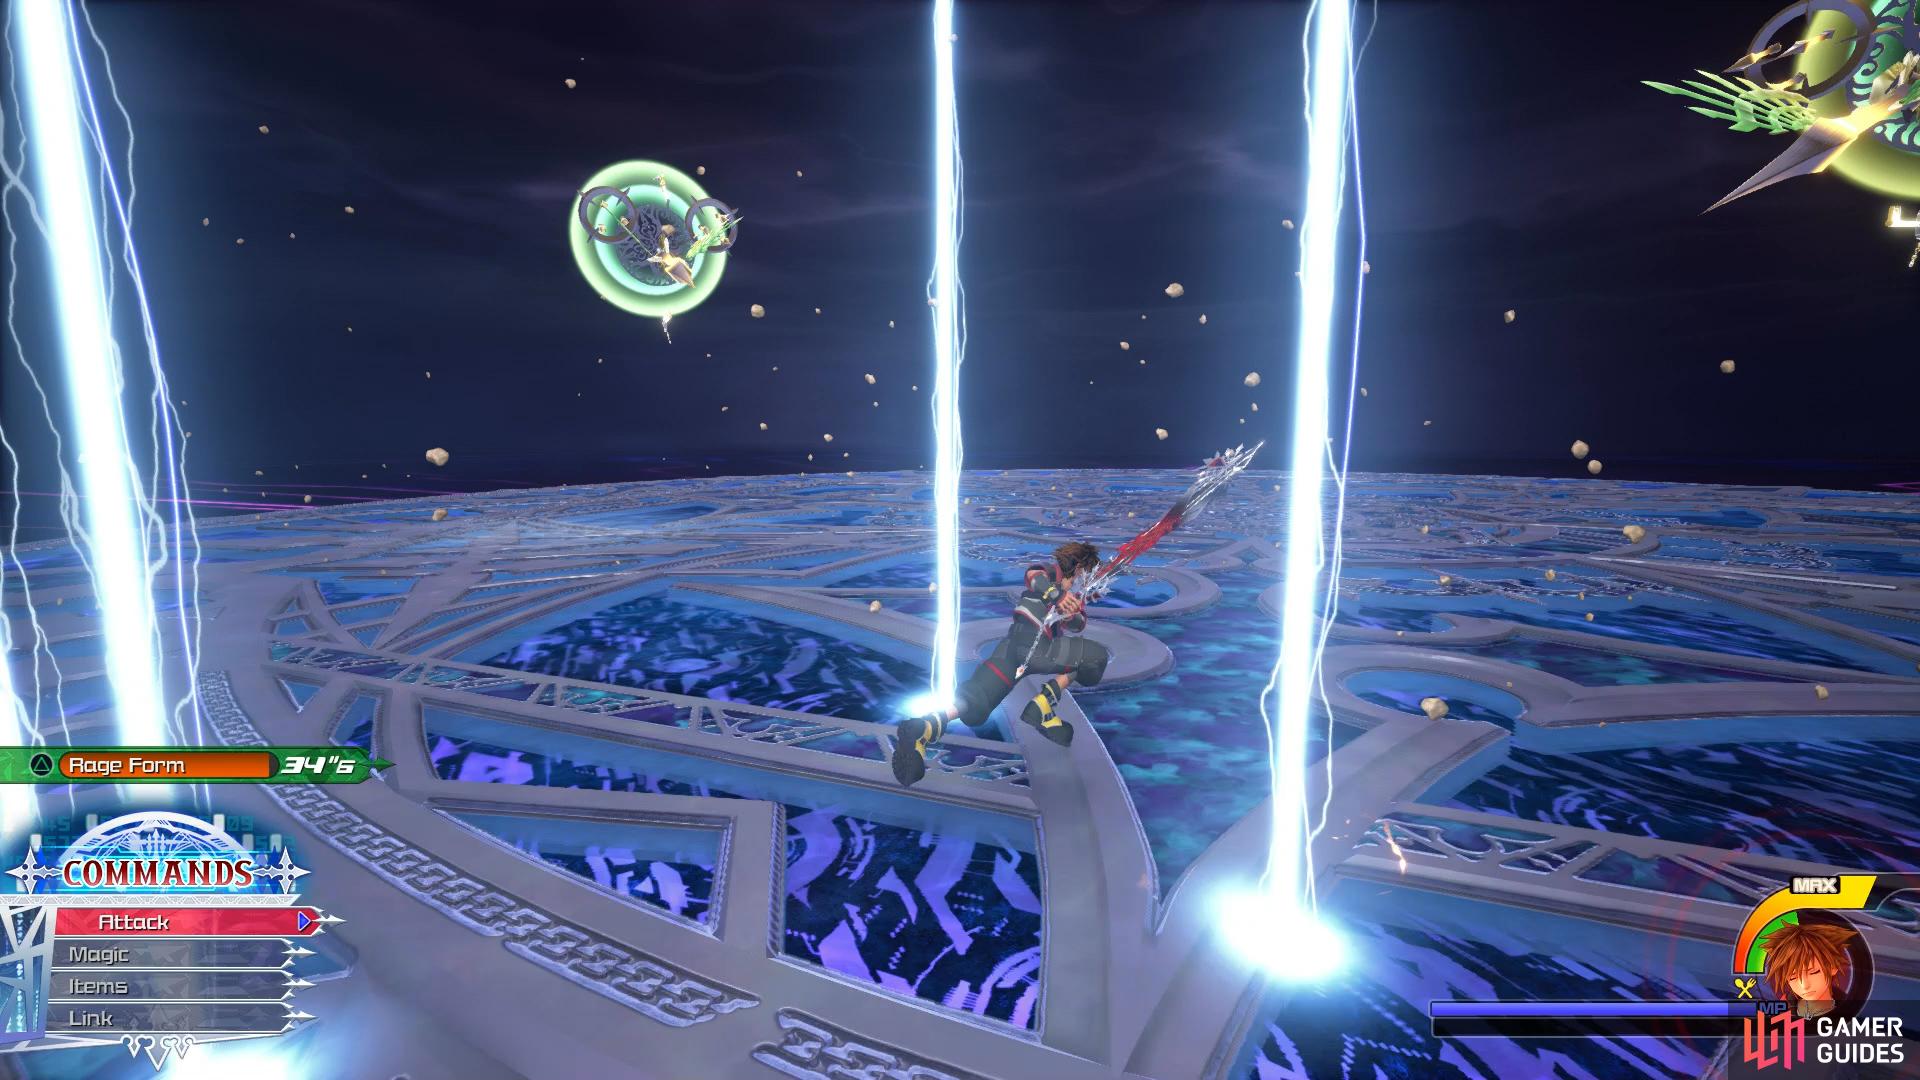 this Lightning Field will restrict your movement